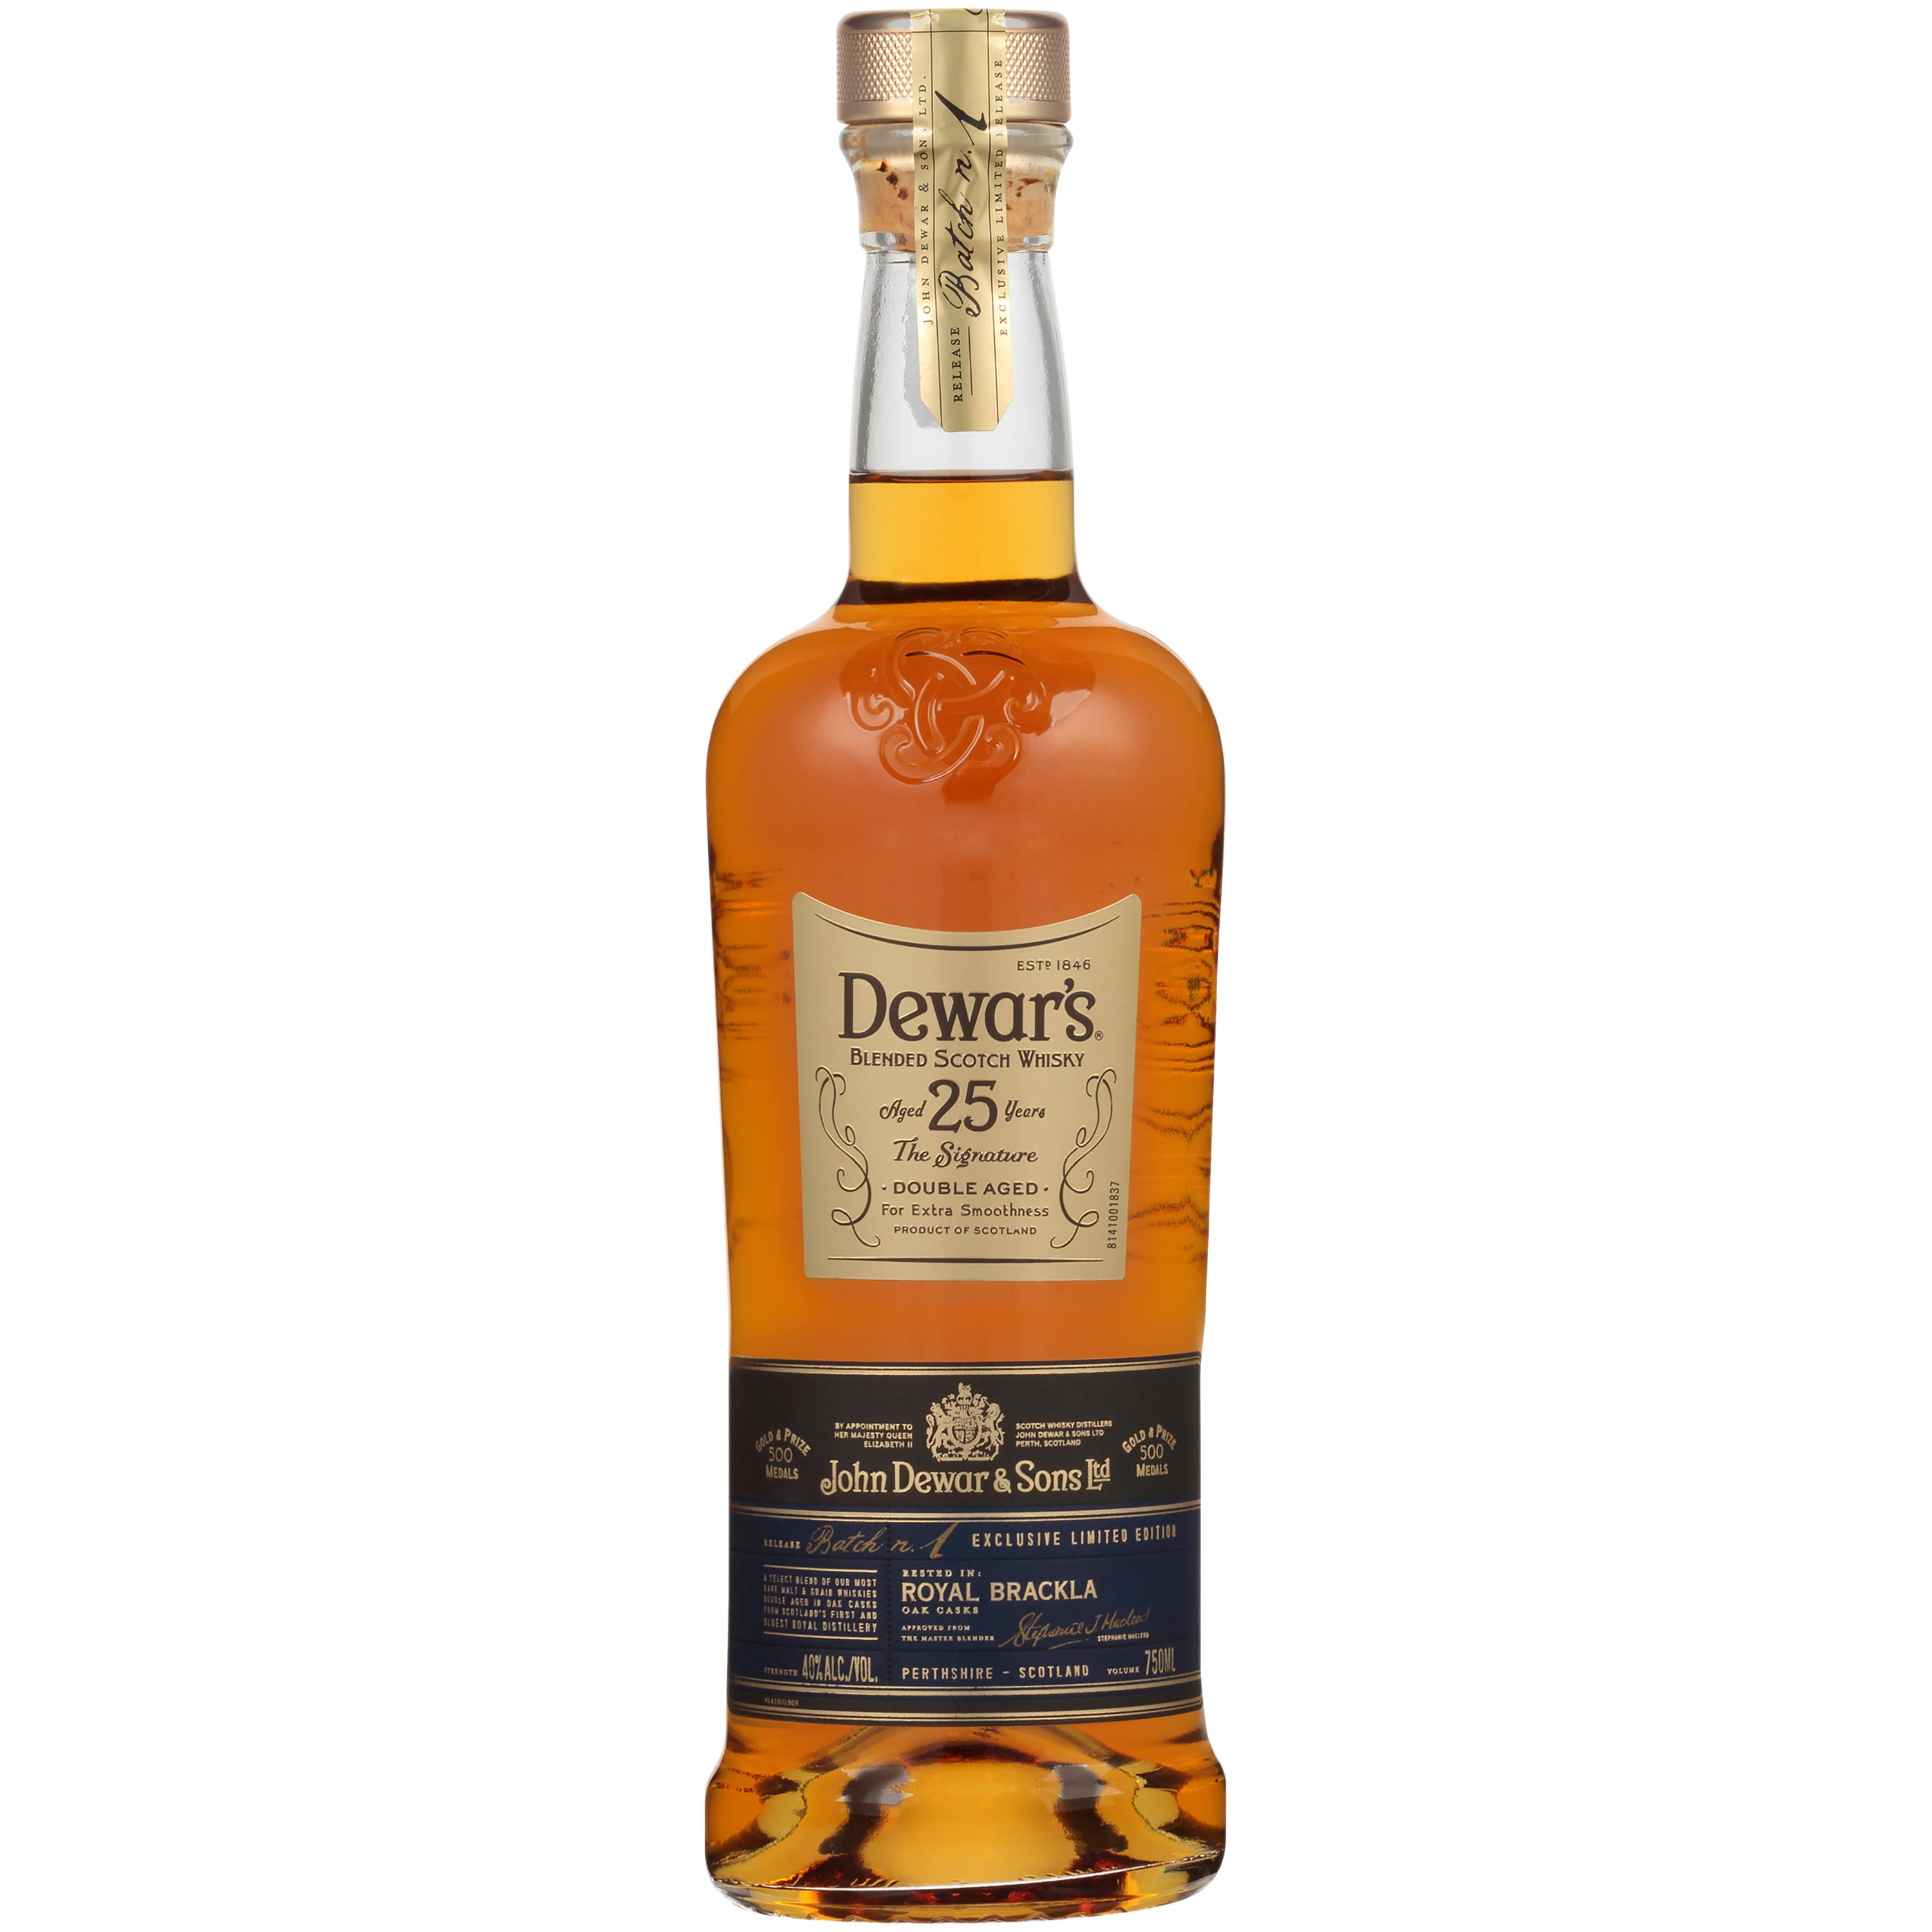 Dewar's 25 Year Old The Signature Blended Scotch Whisky 750ml